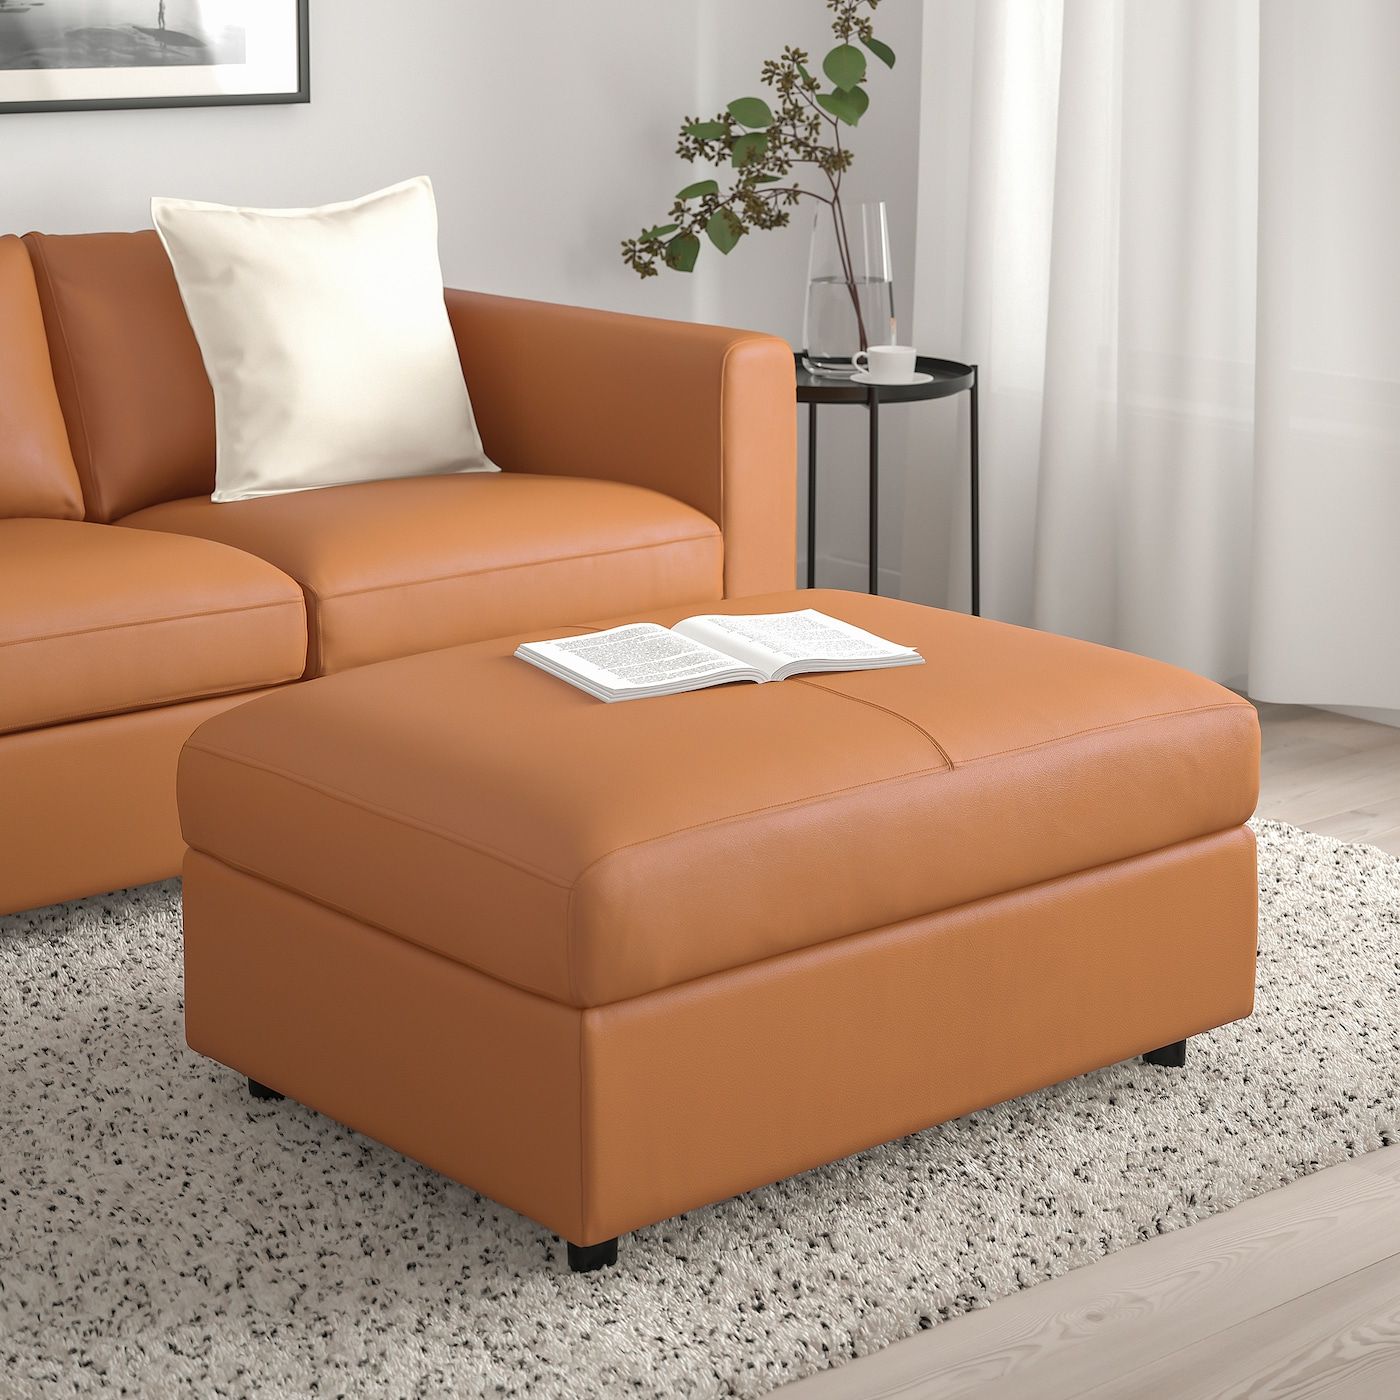 Finnala Ottoman With Storage, Grann/bomstad Golden Brown – Ikea With Current Brown Leather Ottomans (View 8 of 10)